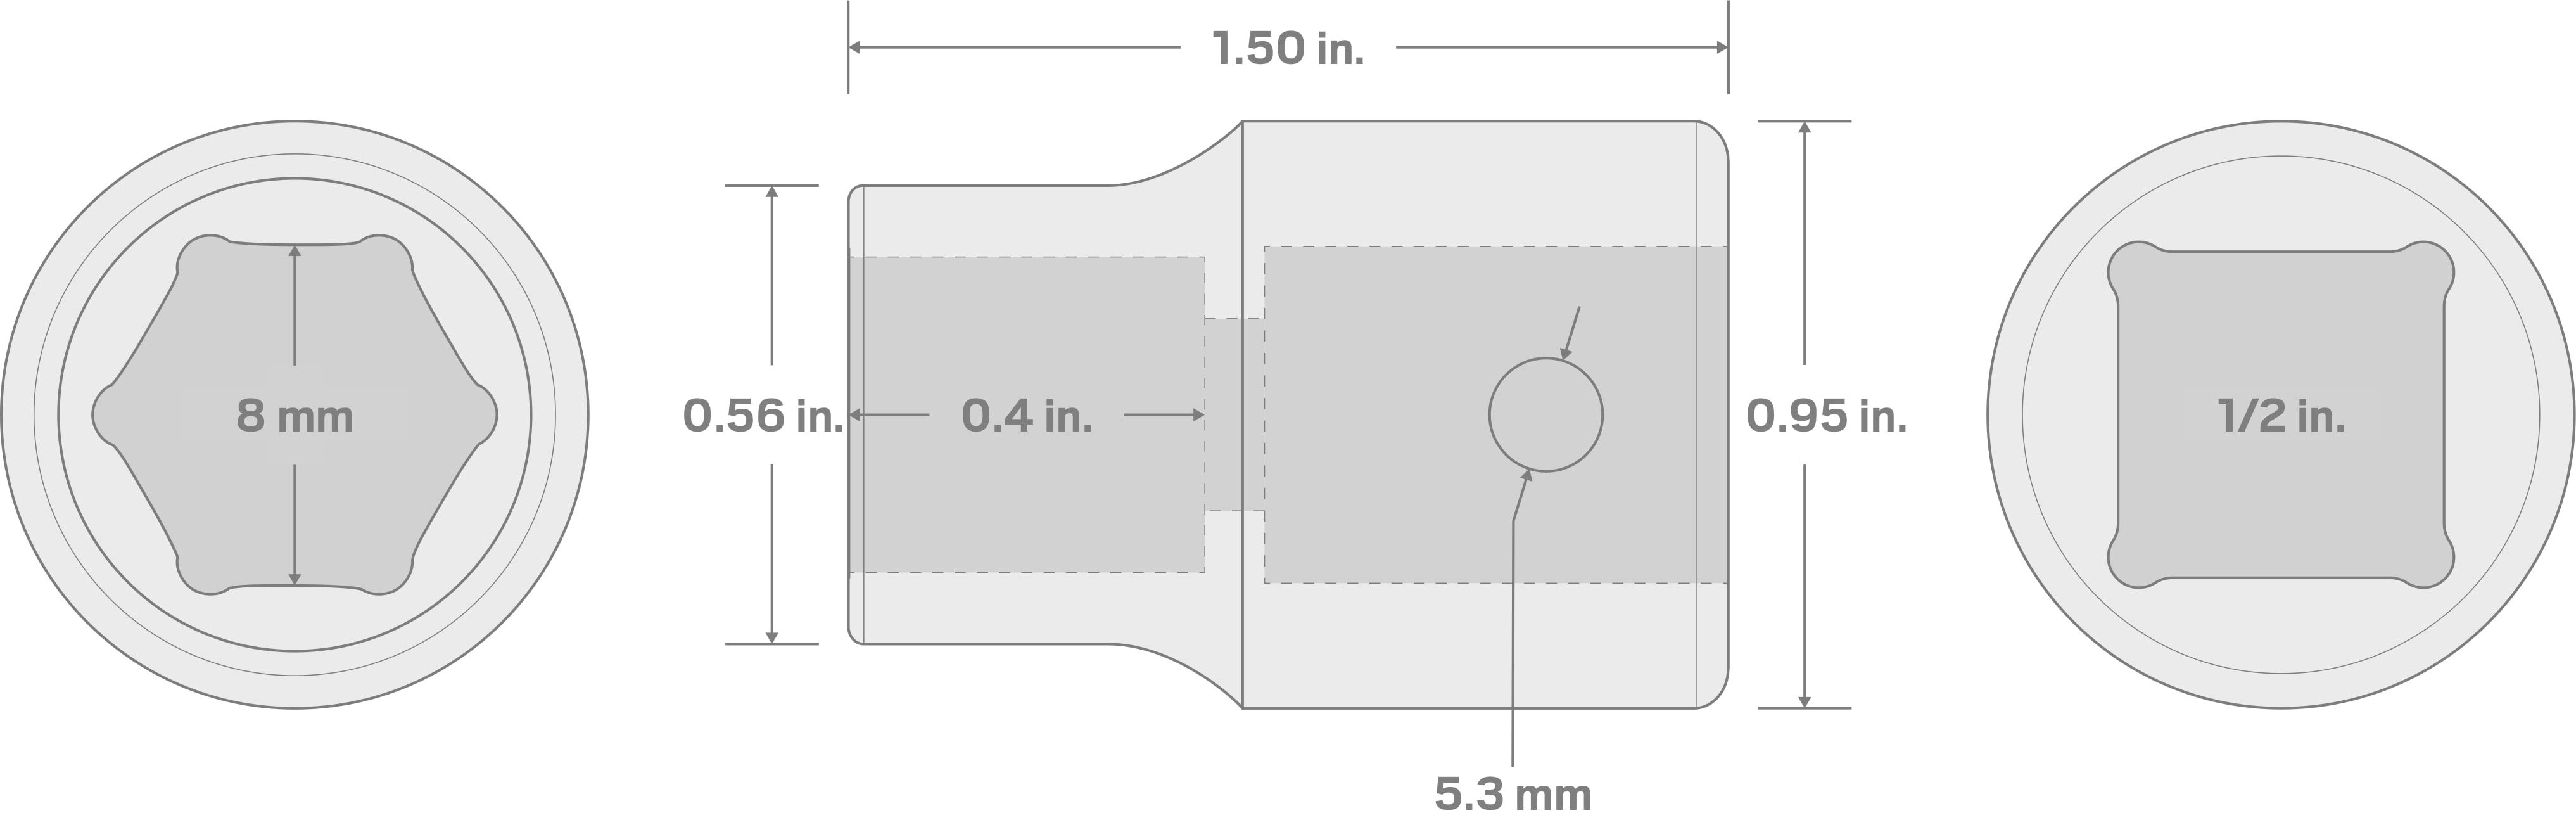 Specs for 1/2 Inch Drive x 8 mm 6-Point Impact Socket